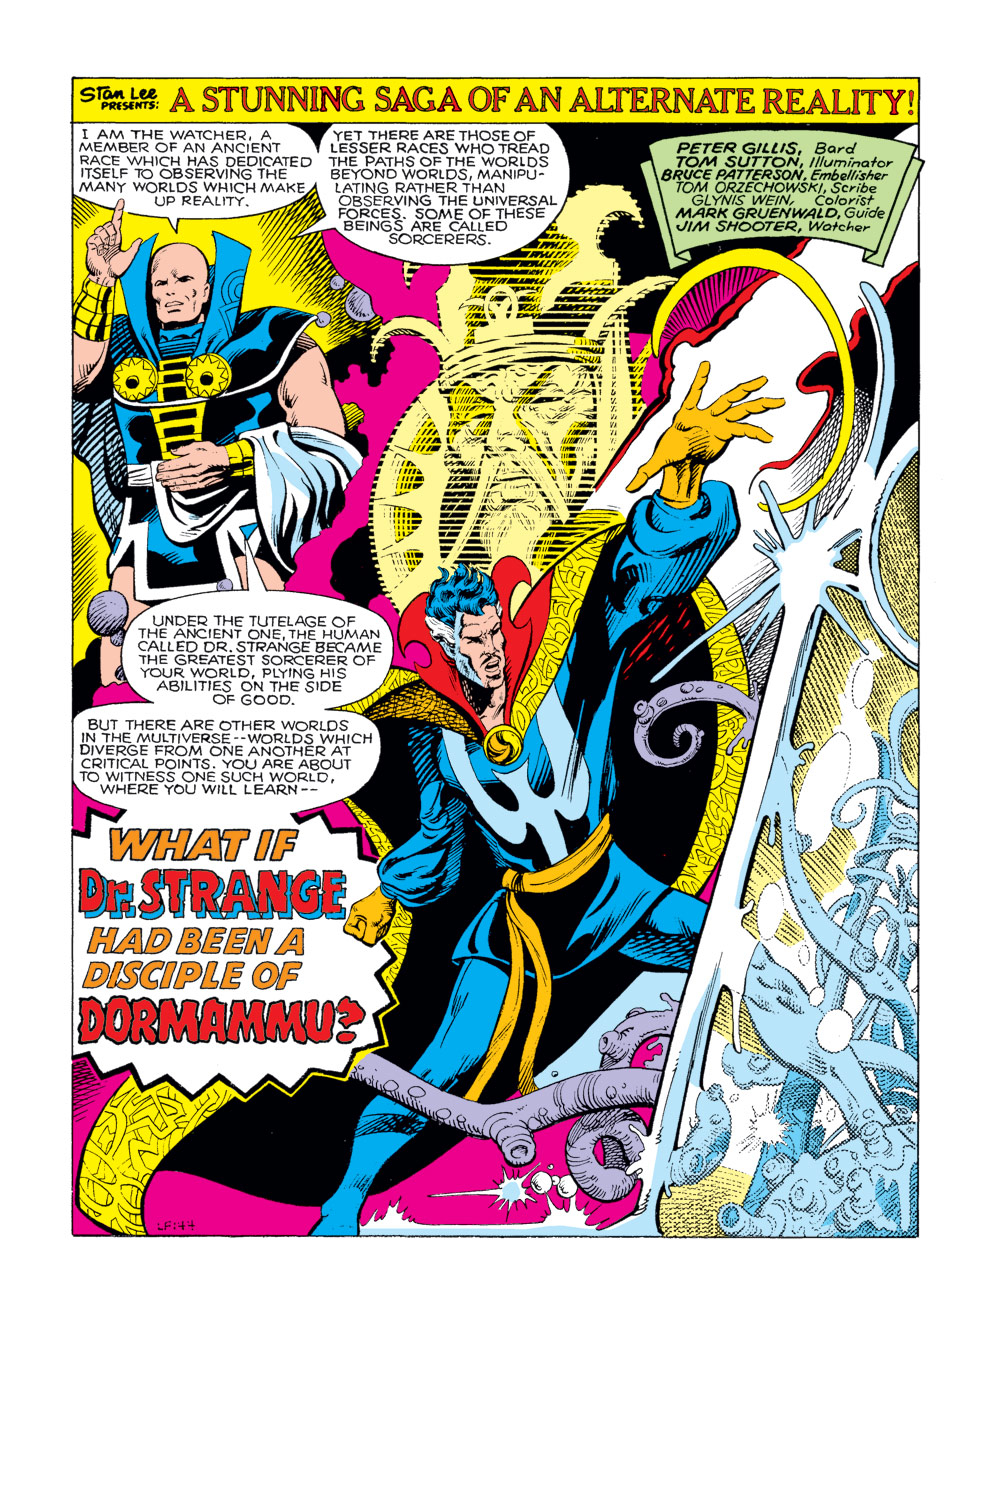 What If? (1977) Issue #18 - Dr. Strange were a disciple of Dormammu #18 - English 2